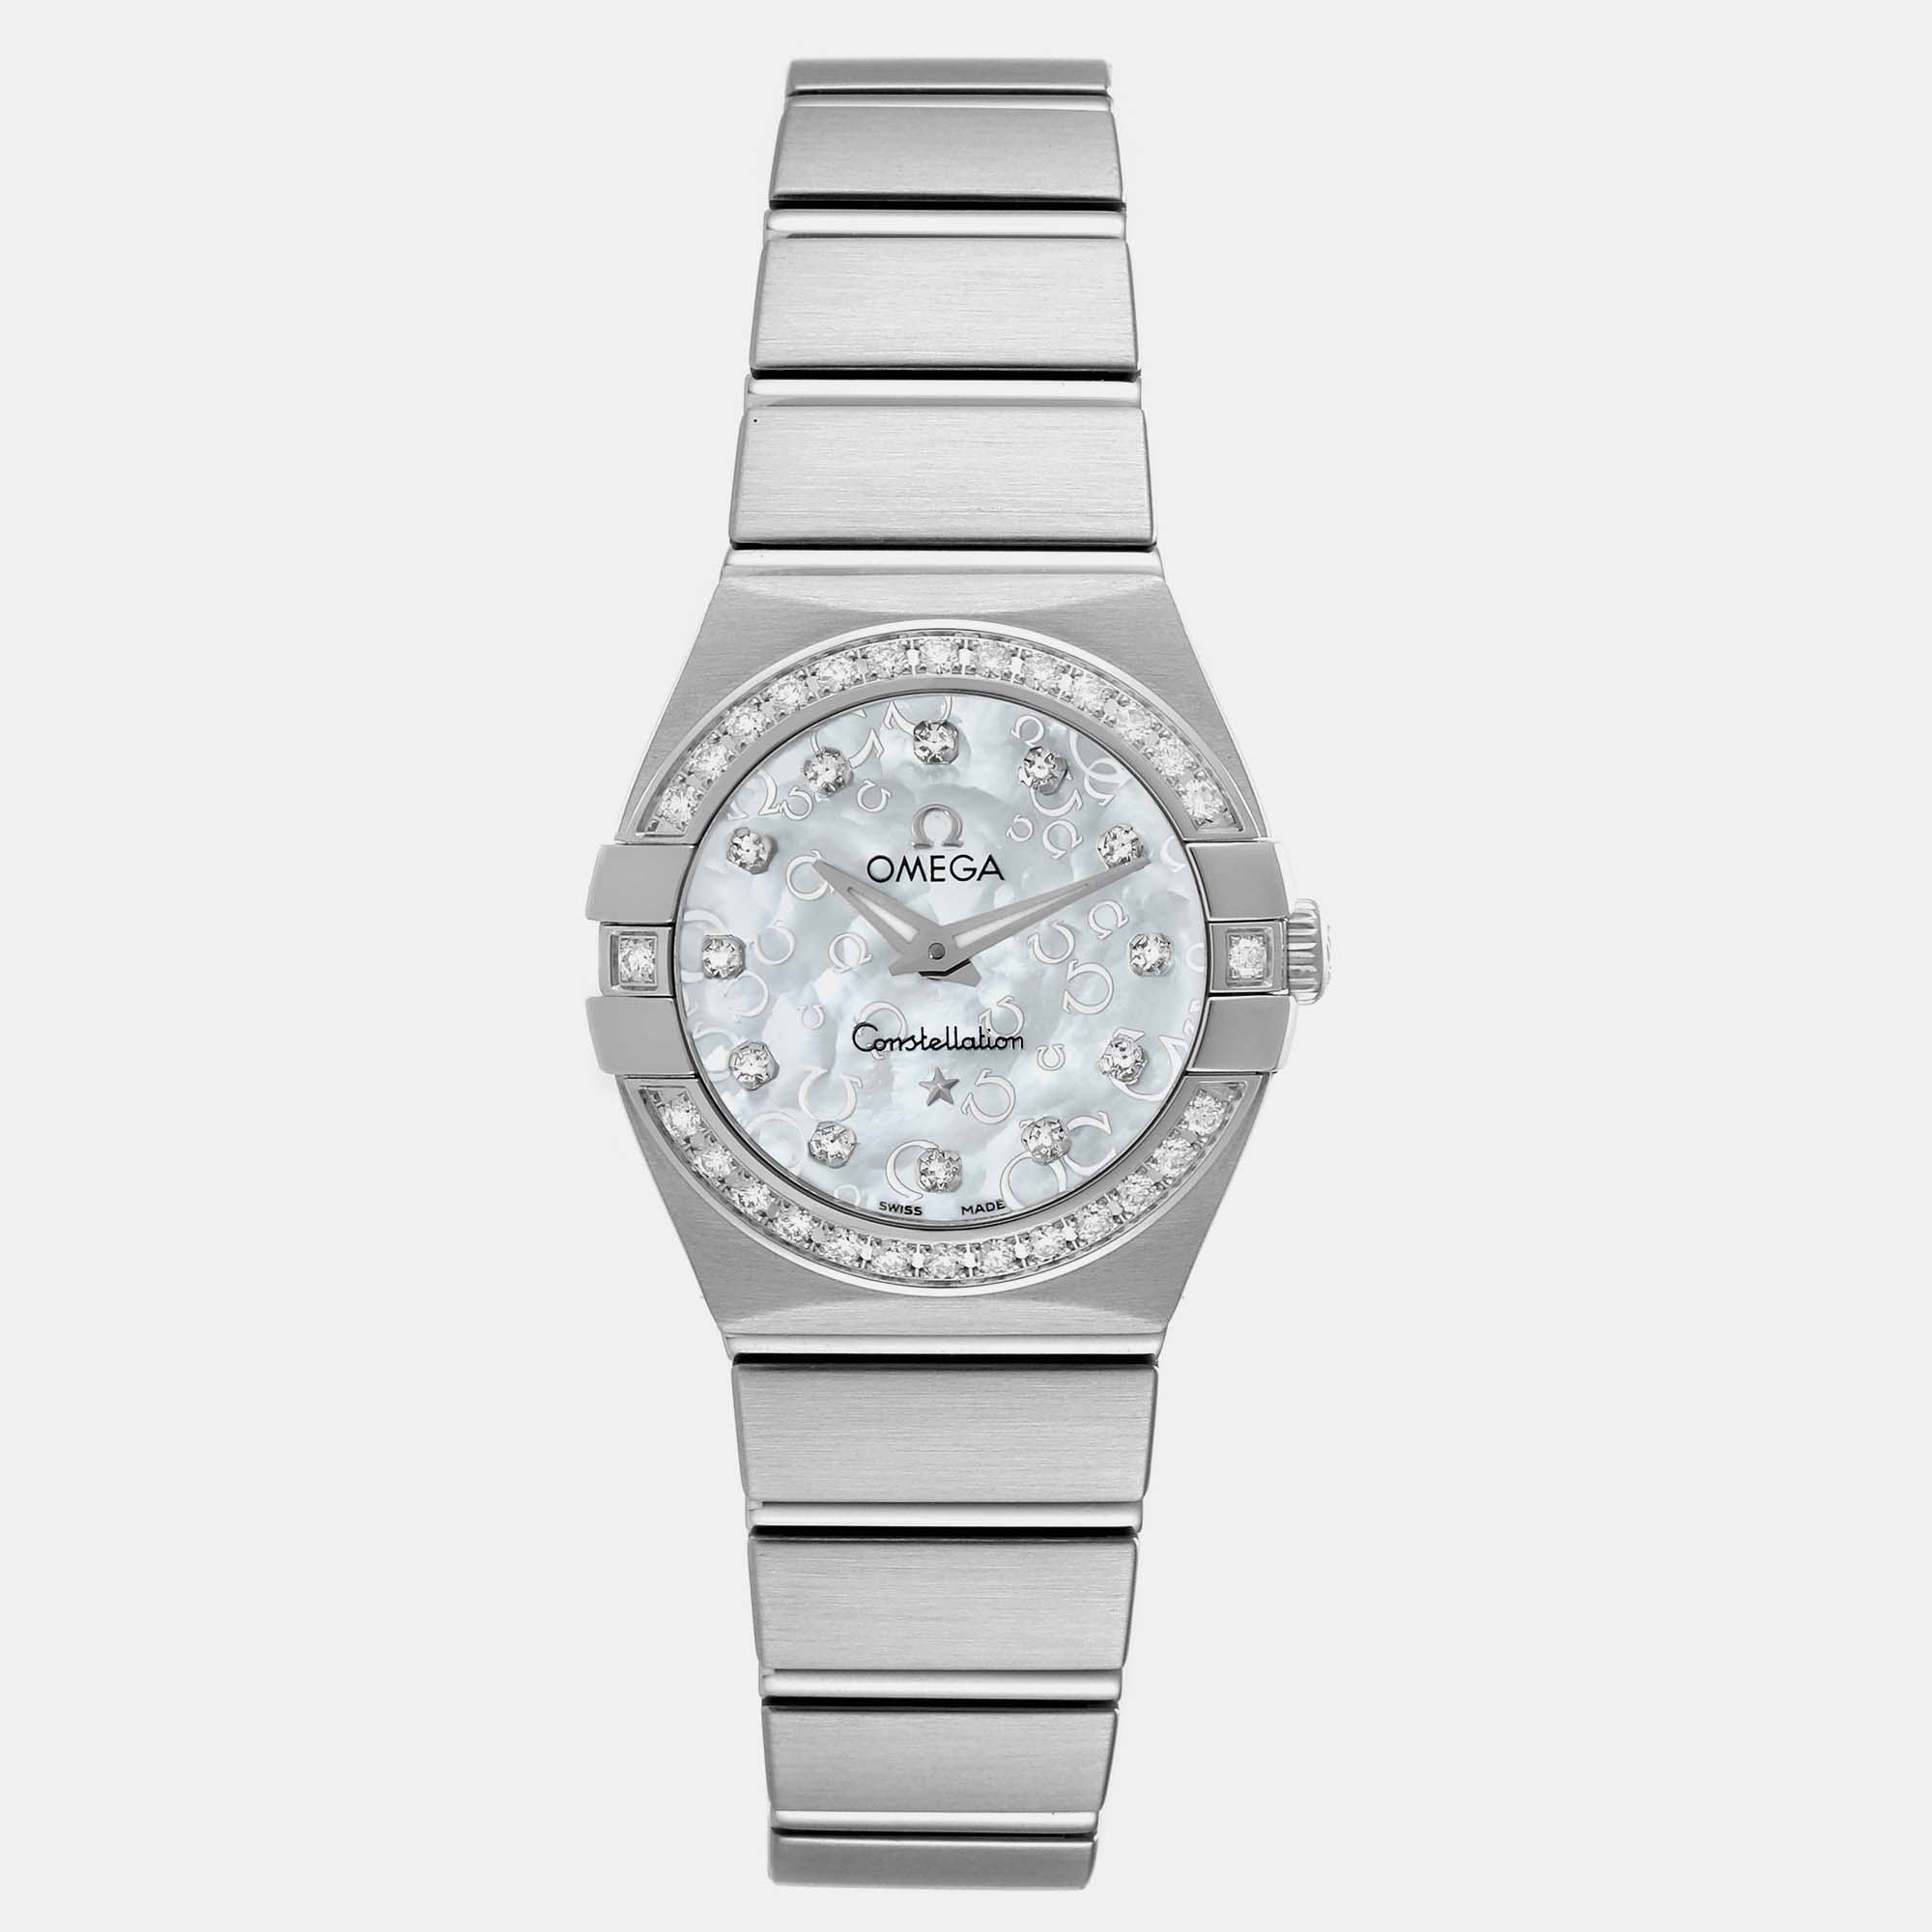 Omega mother of pearl diamond stainless steel constellation 123.15.24.60.52.001 quartz women's wristwatch 24 mm